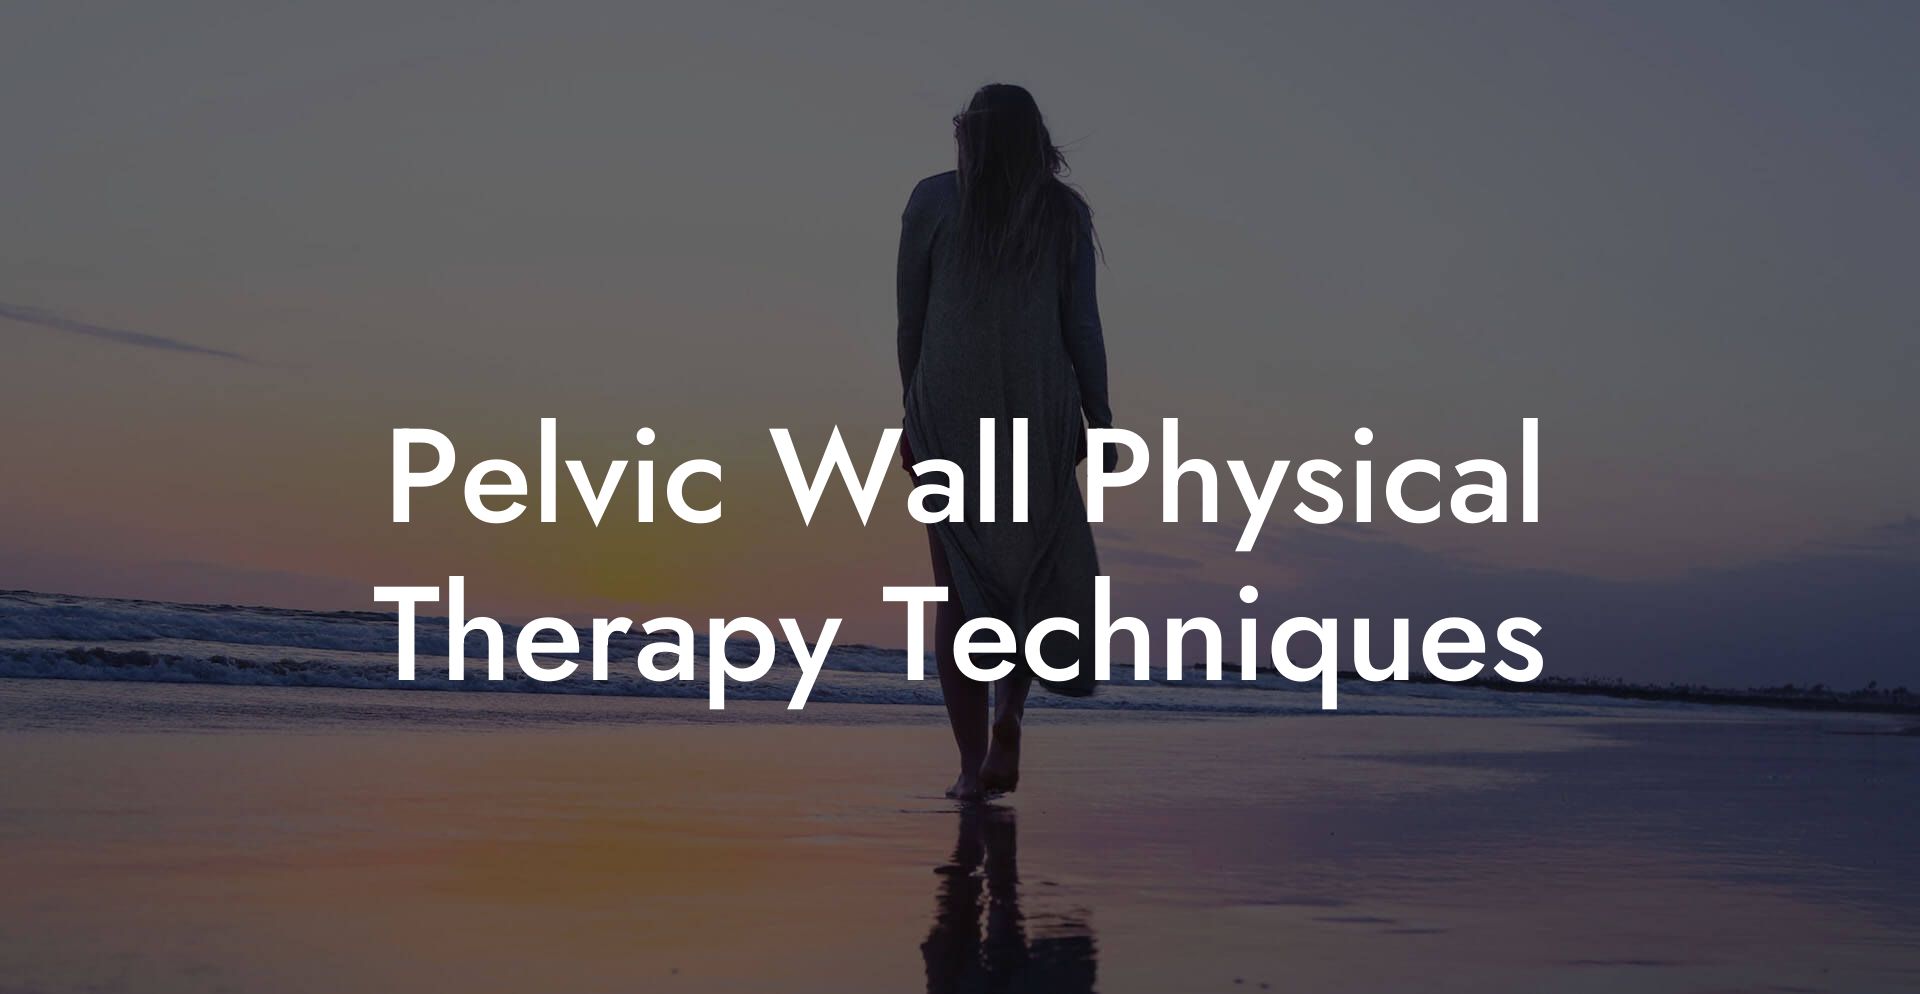 Pelvic Wall Physical Therapy Techniques